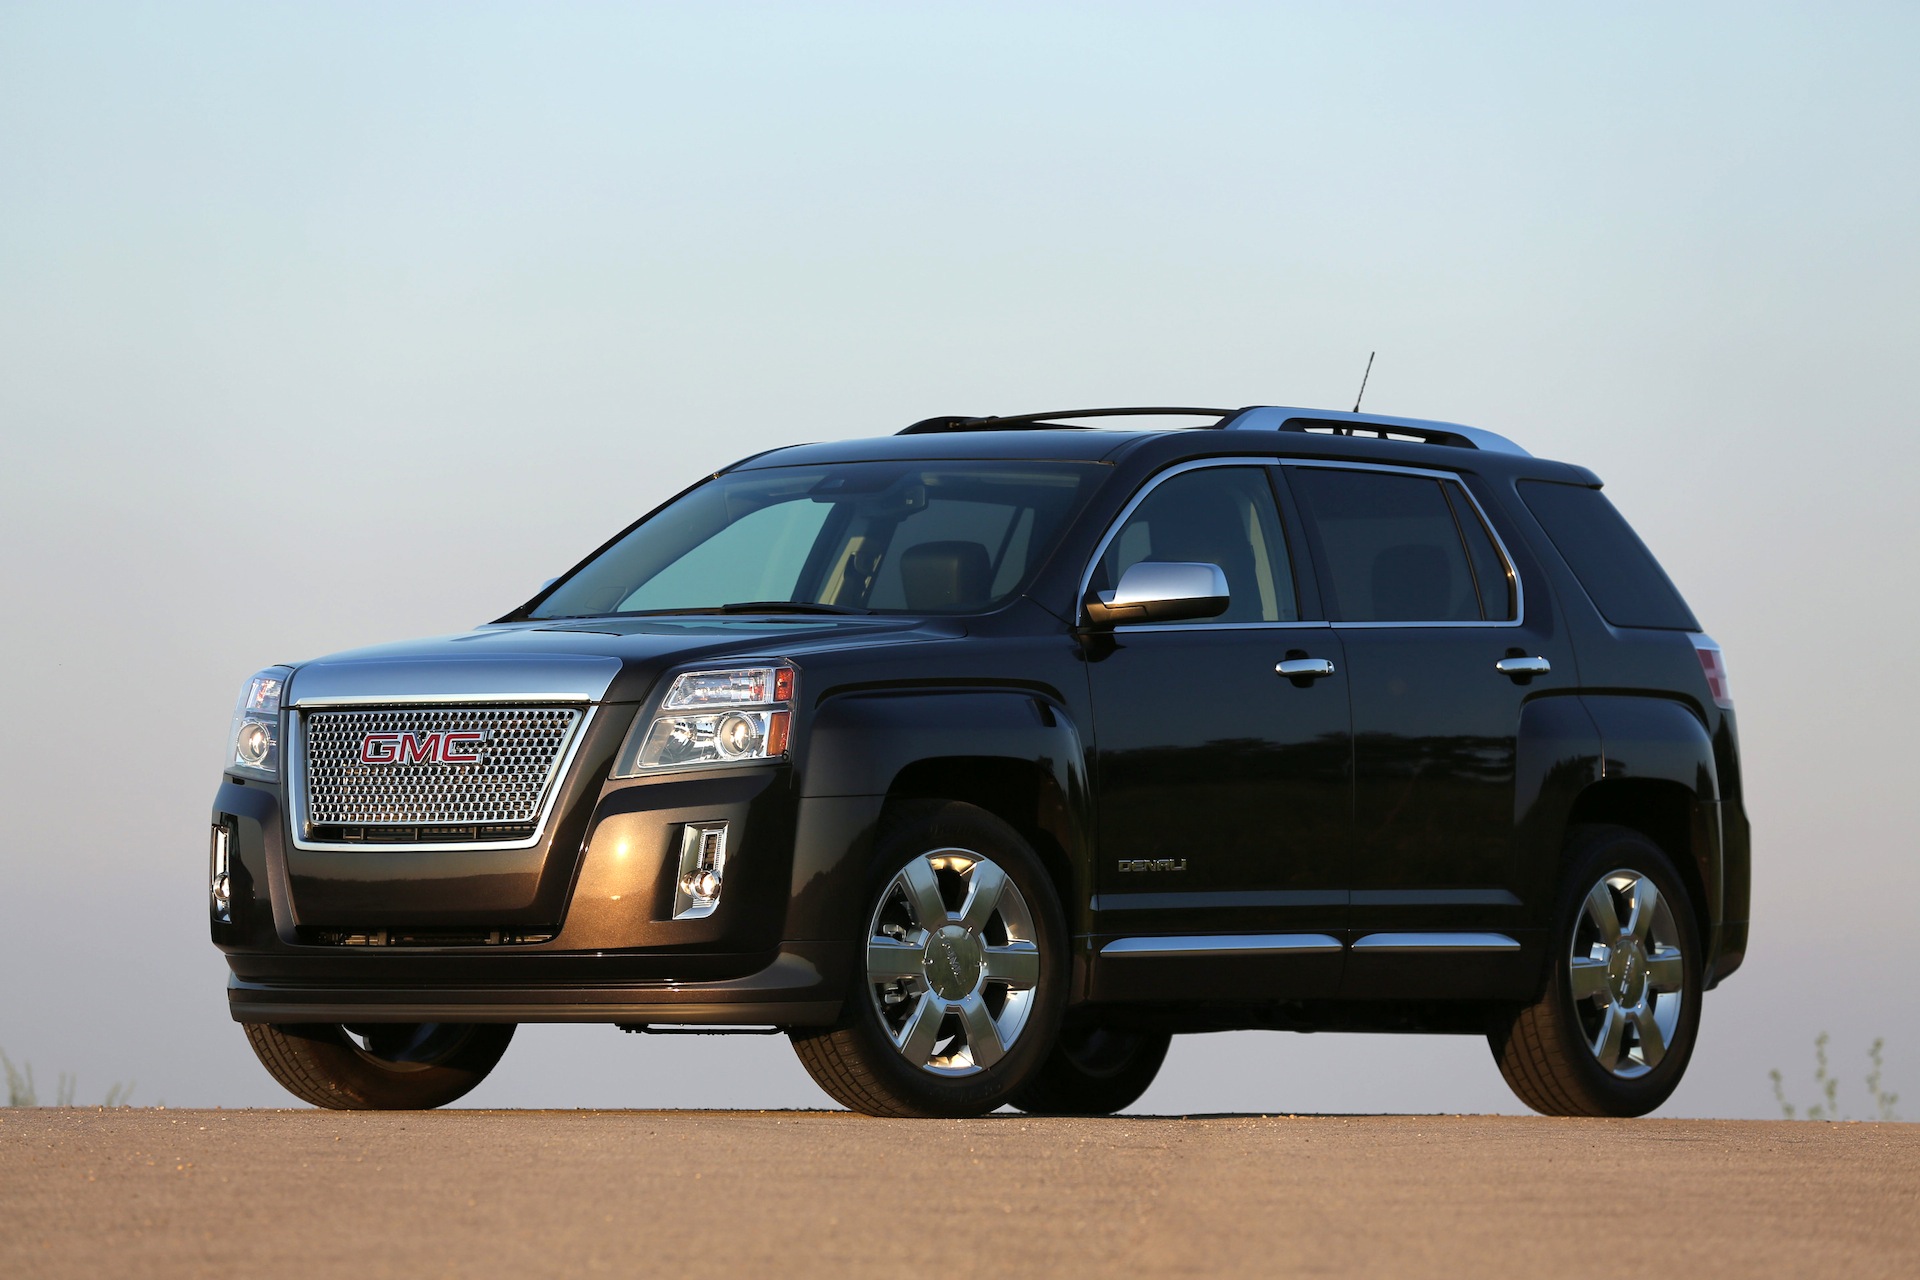 2014 GMC Terrain prices and expert review - The Car Connection